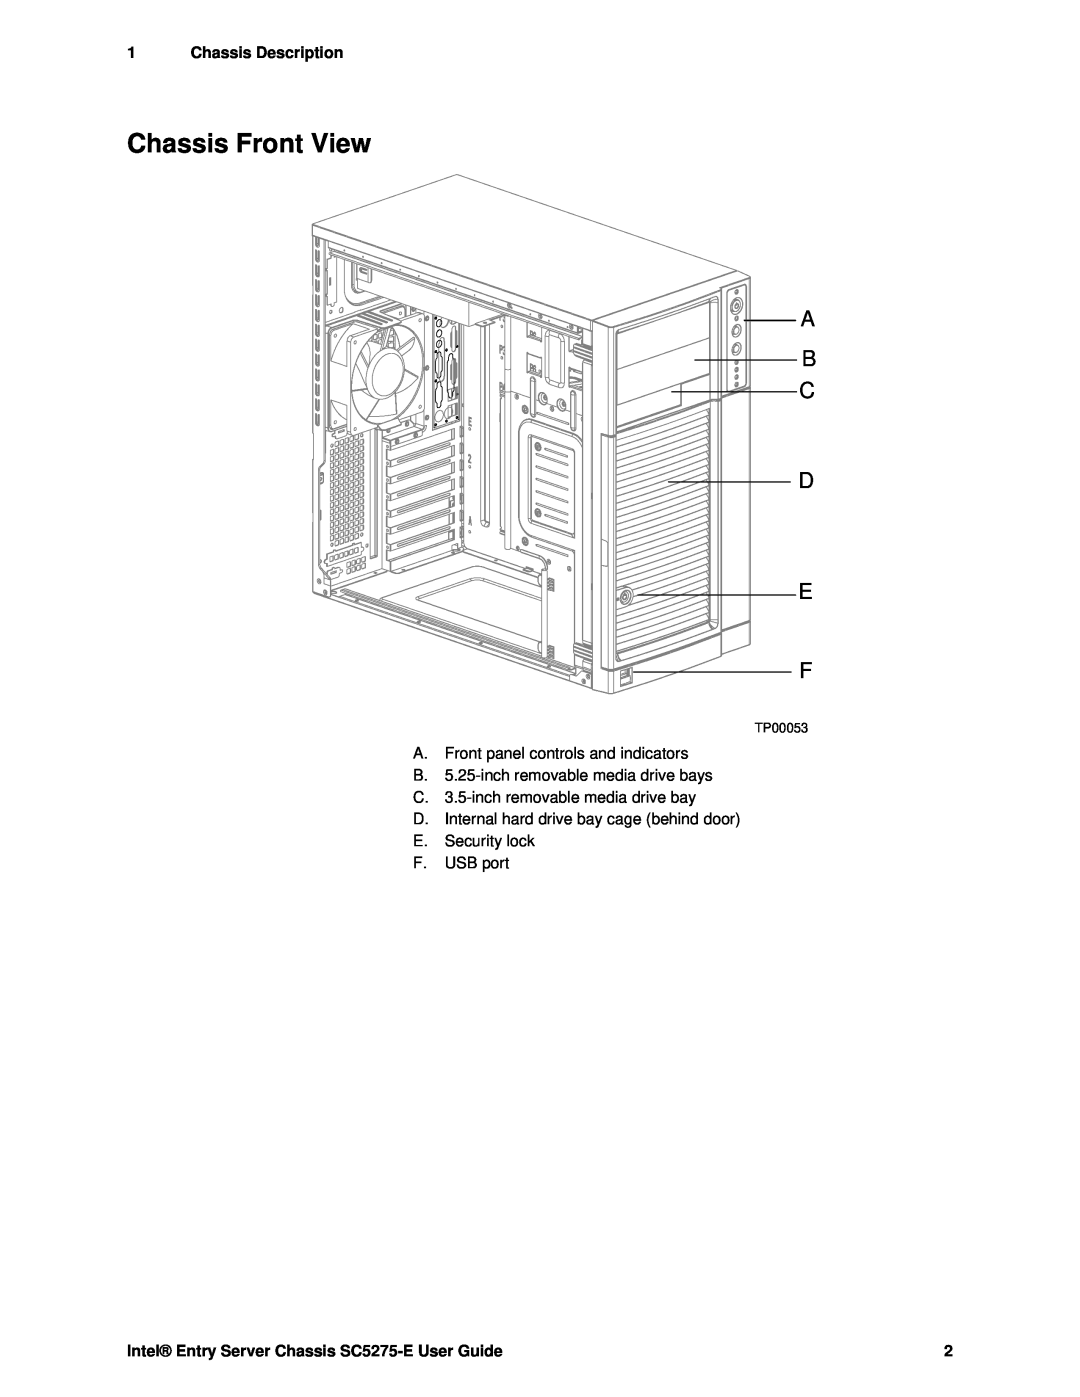 Intel Chassis Front View, A B C D E F, Chassis Description, Intel Entry Server Chassis SC5275-E User Guide, TP00053 